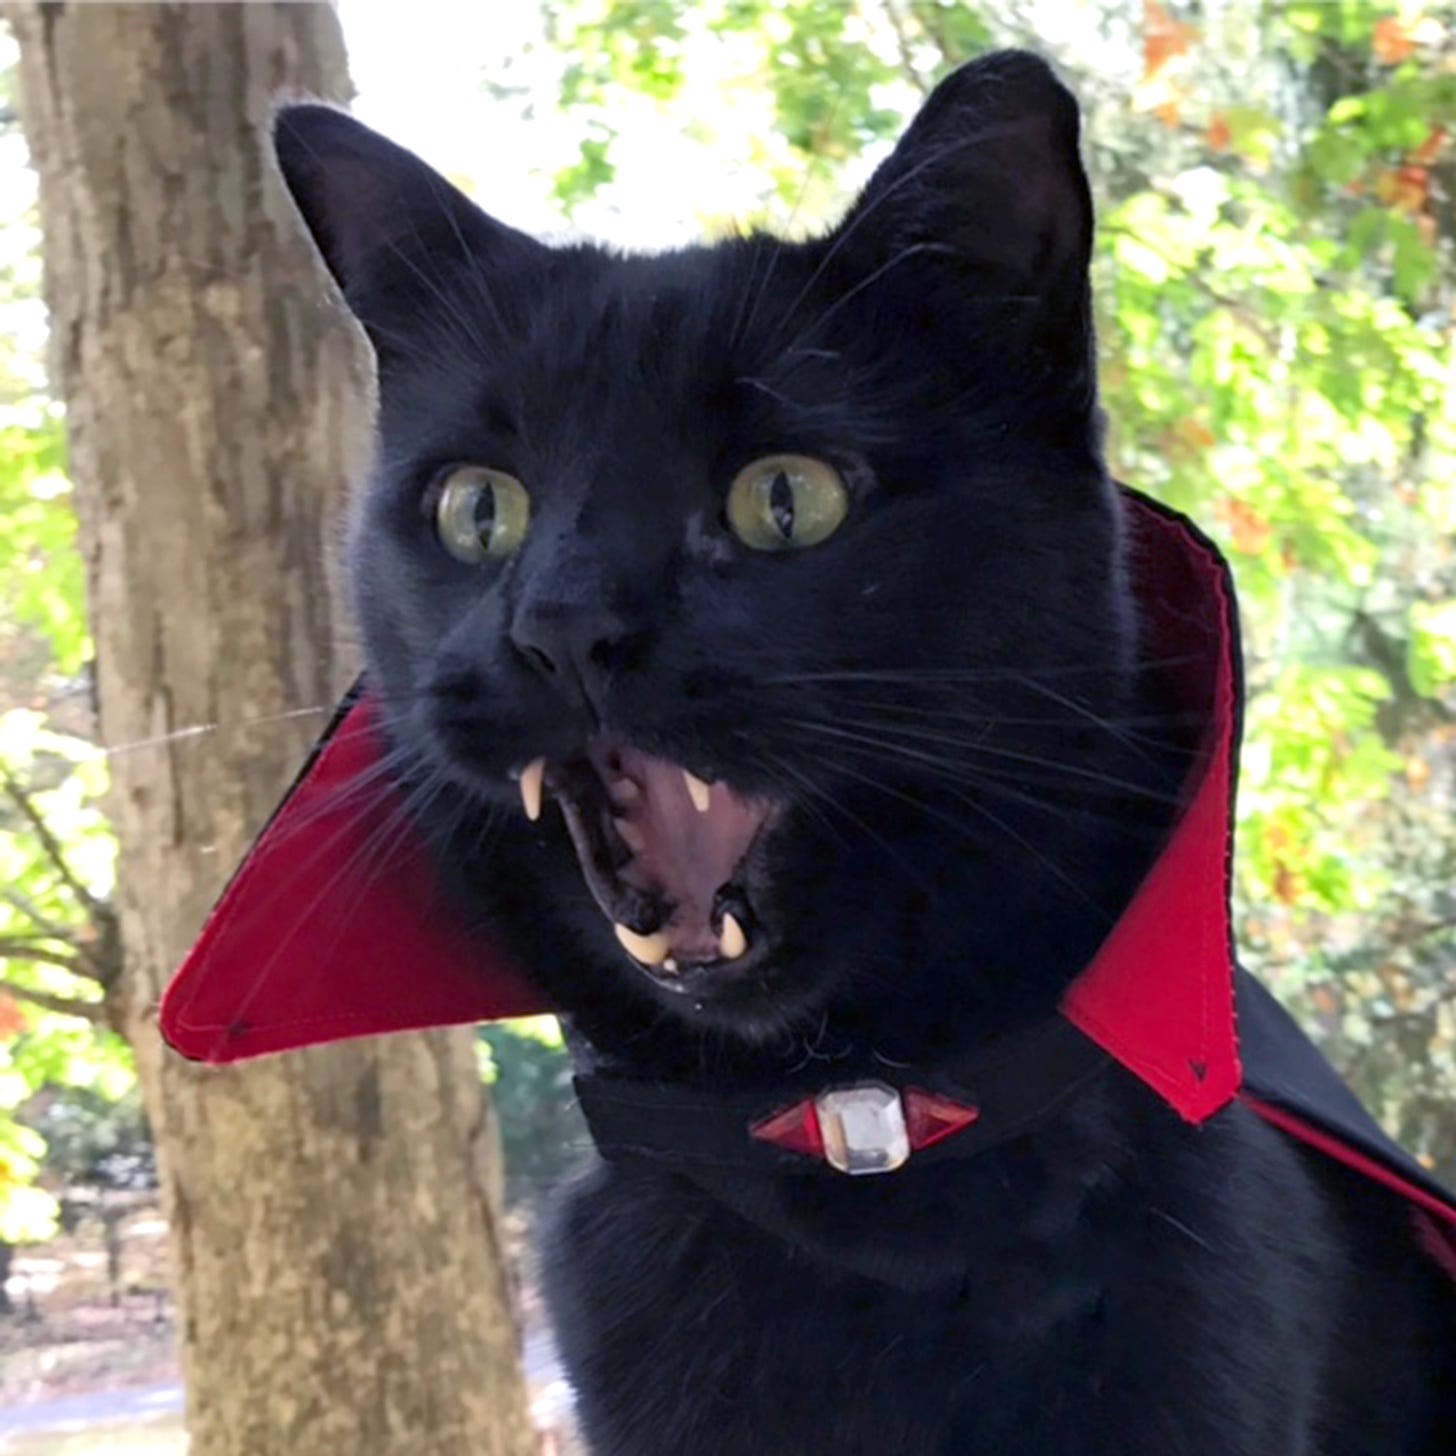 Cat dracula: Kitty with over grown fangs looks vampire - Storytrender